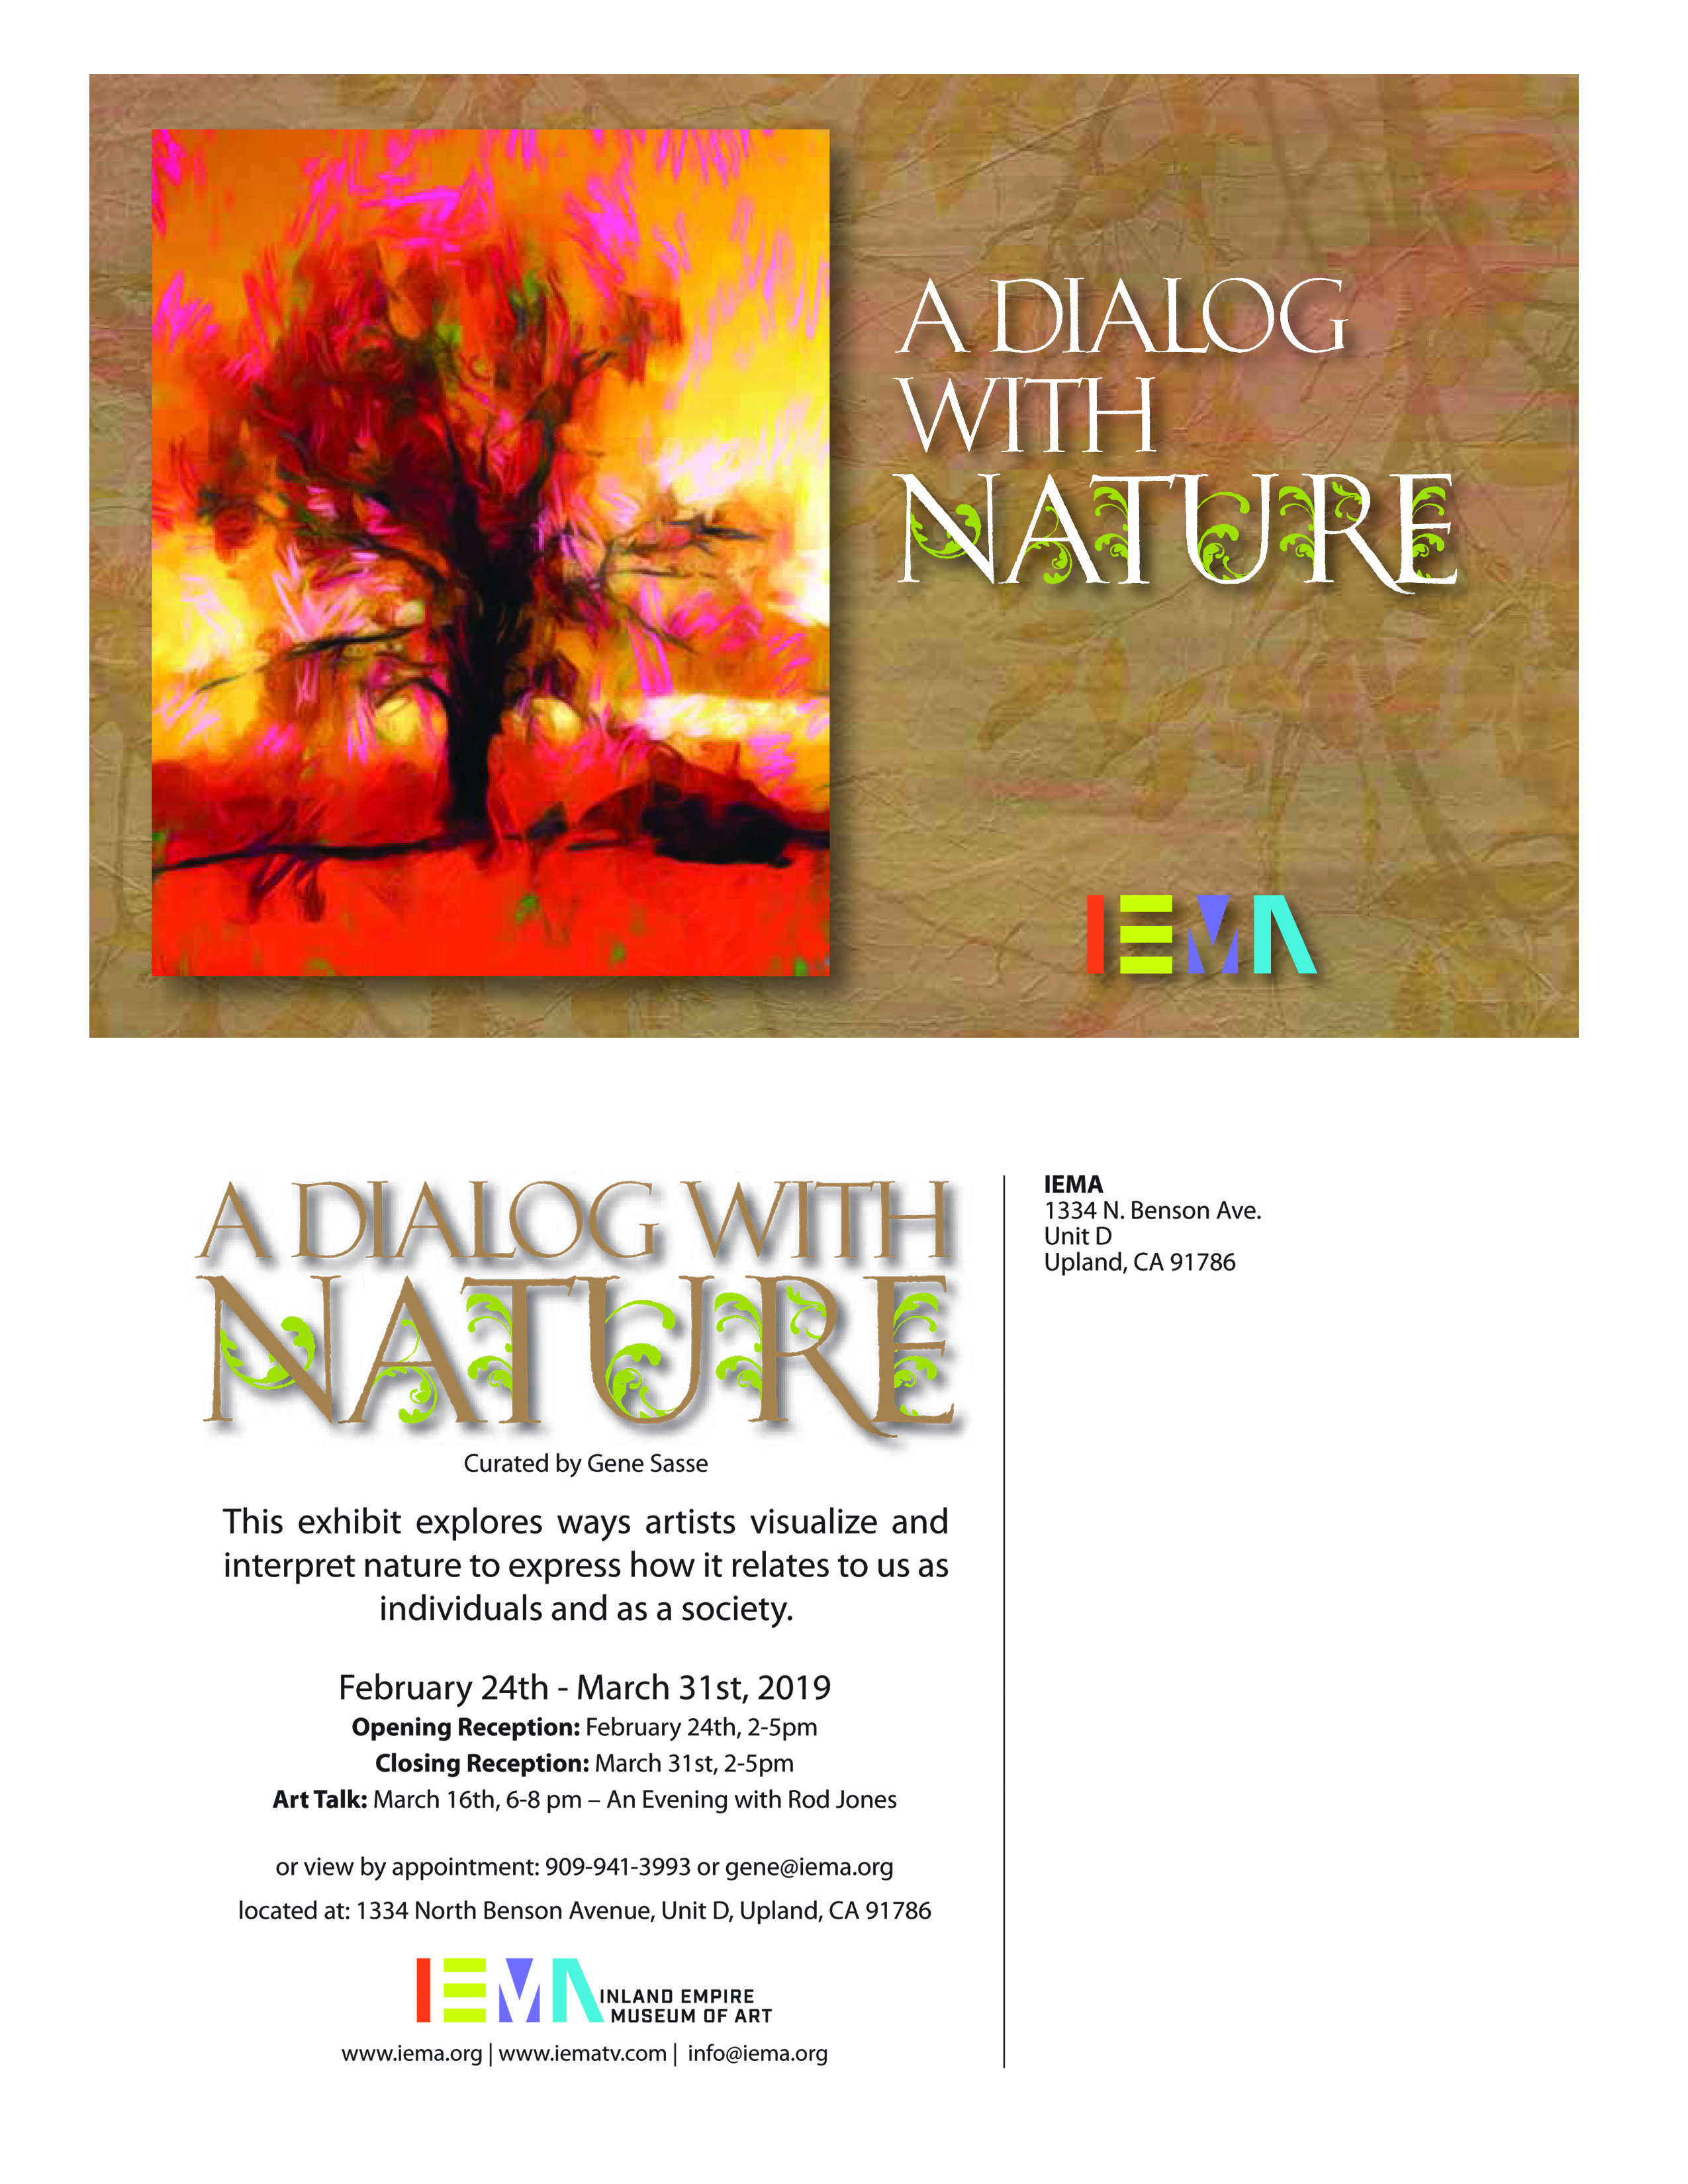 IEMA - Dialogue with Nature - February 24 - March 31, 2019